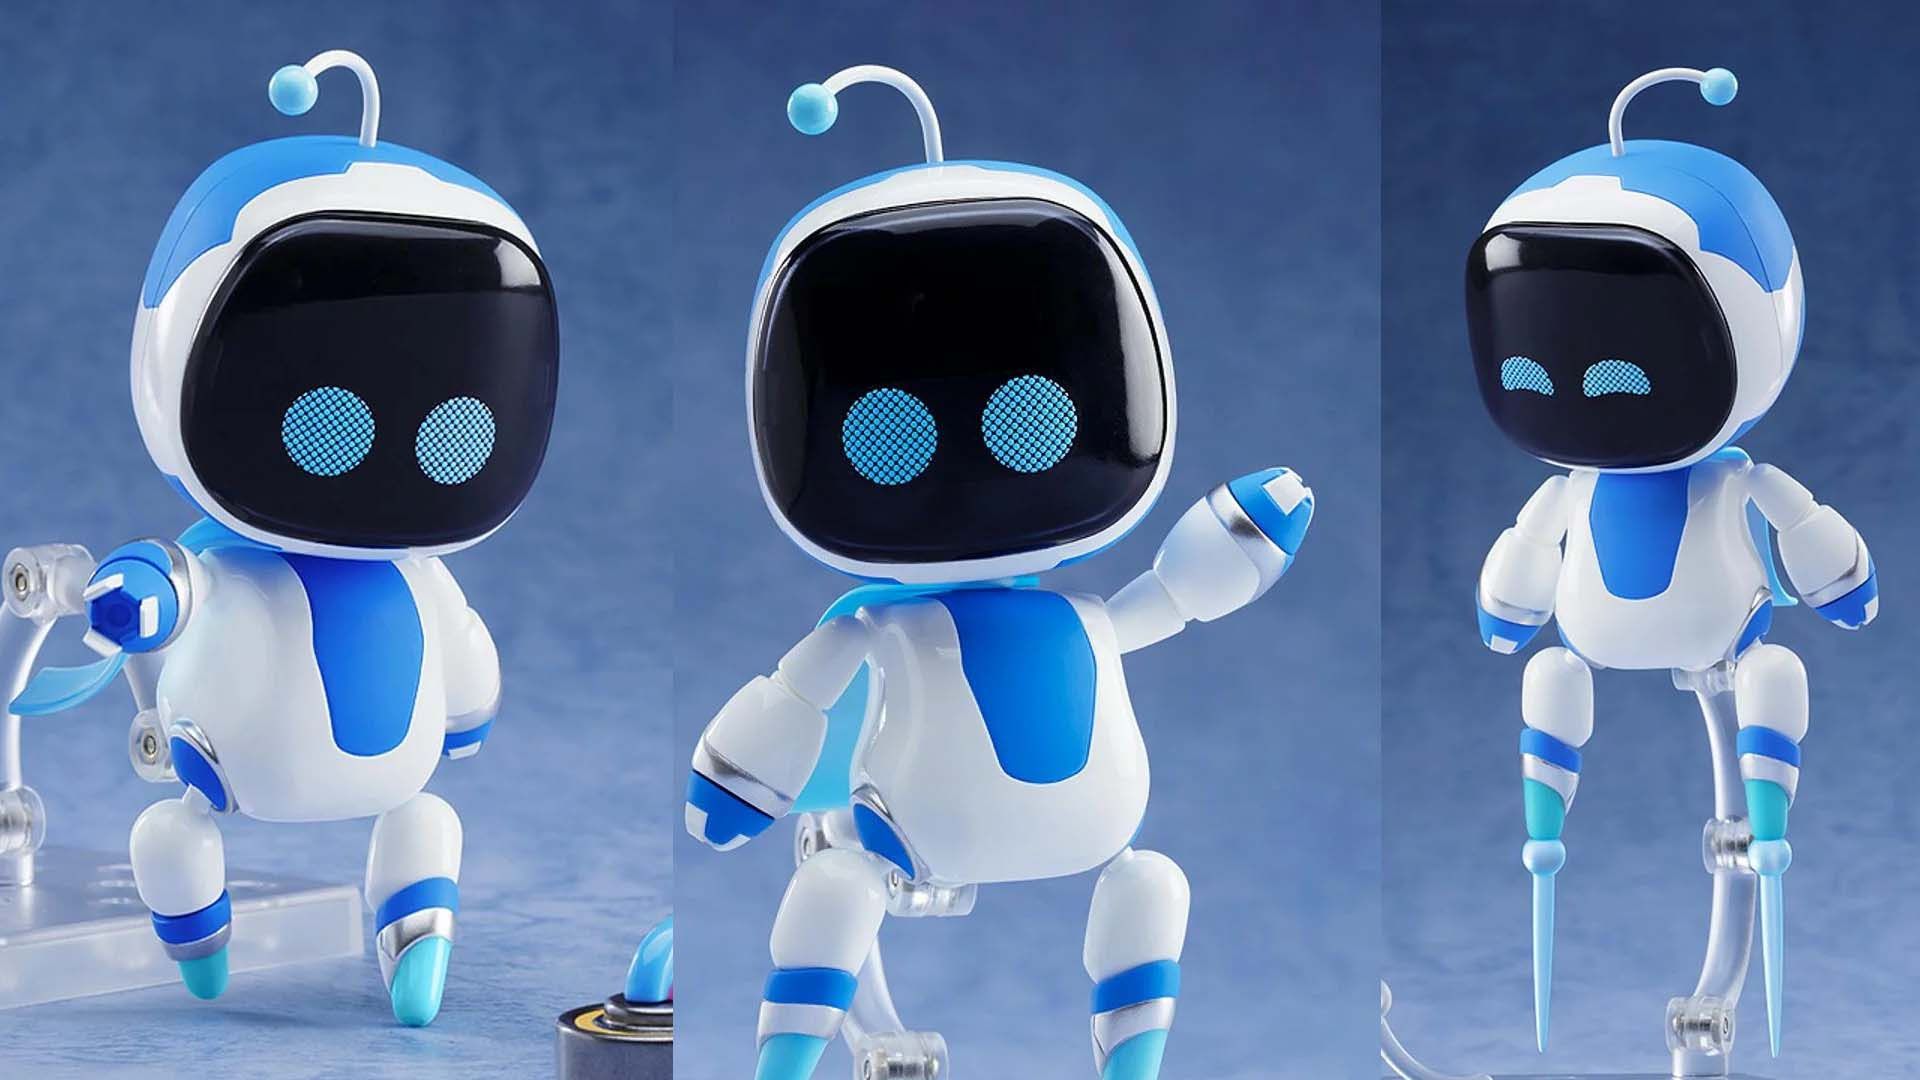 PlayStation’s Astro Bot Becomes a Real Mascot With Cute Nendoroid